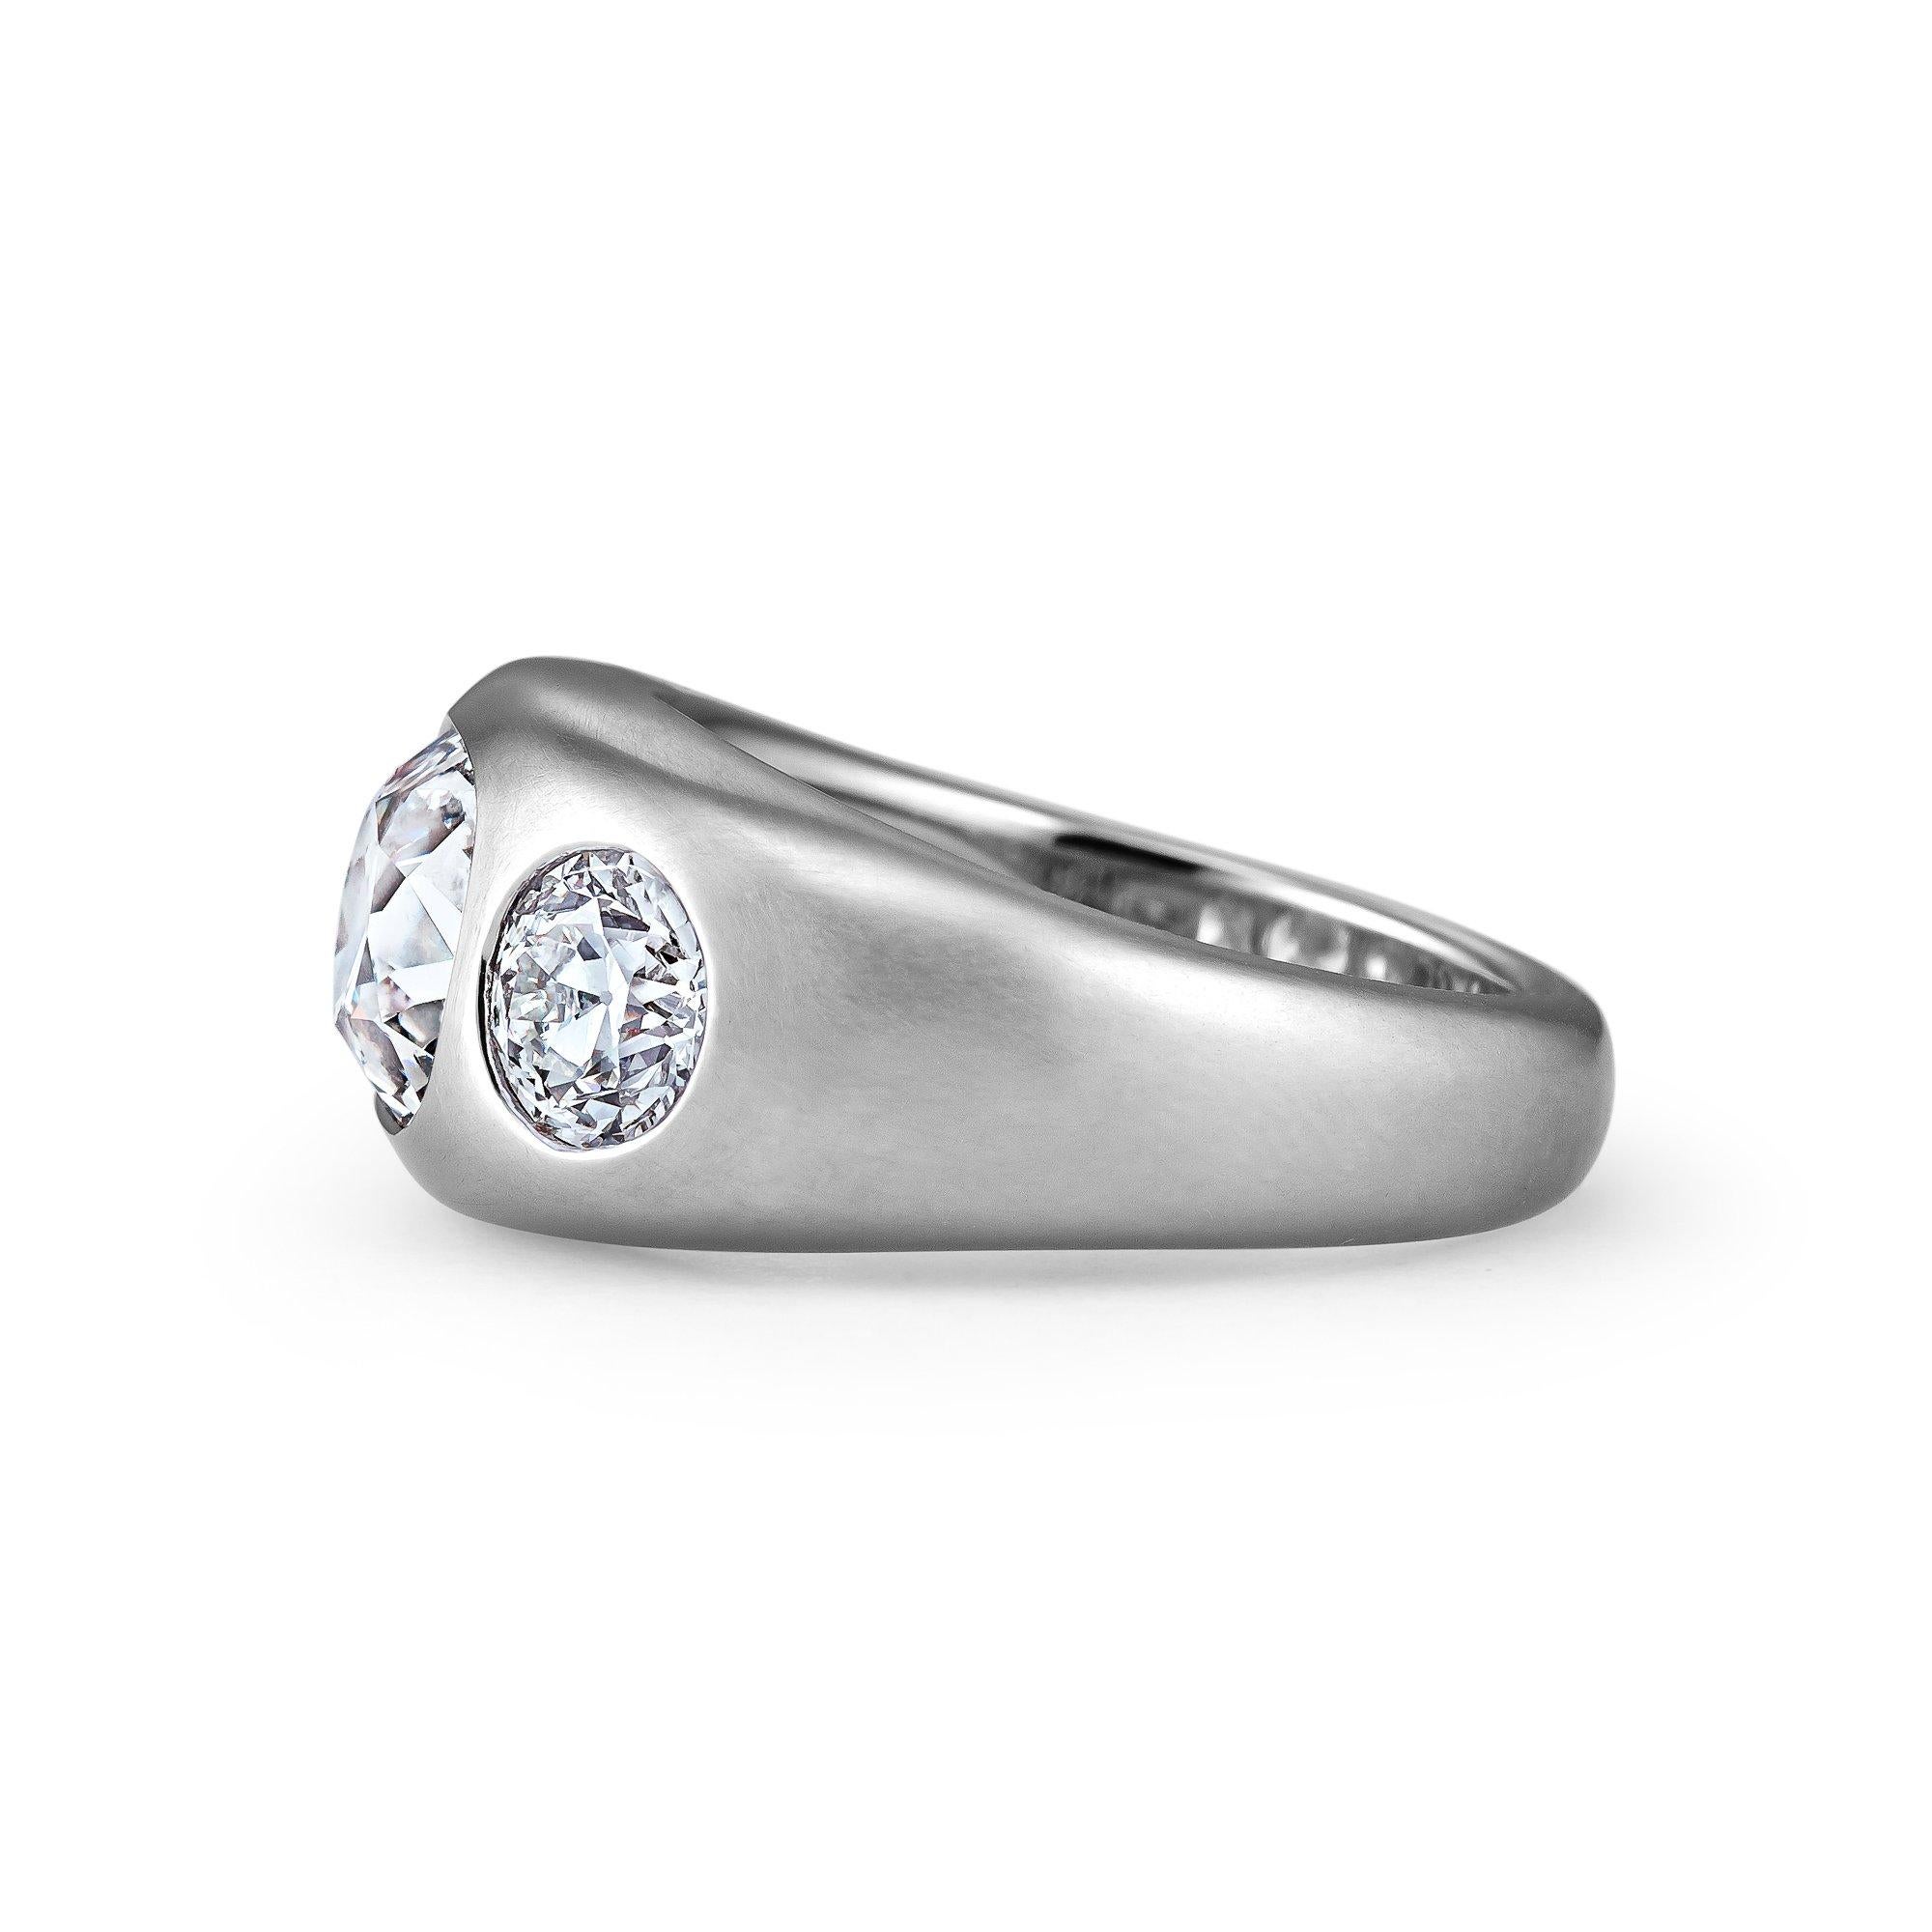 Popular in the Victorian era, the gypsy band ring symbolized eternal friendship and love.  With three diamonds set flush with the surface of this domed gypsy platinum setting, this handmade band is the modern version of eternal commitment.  Whether